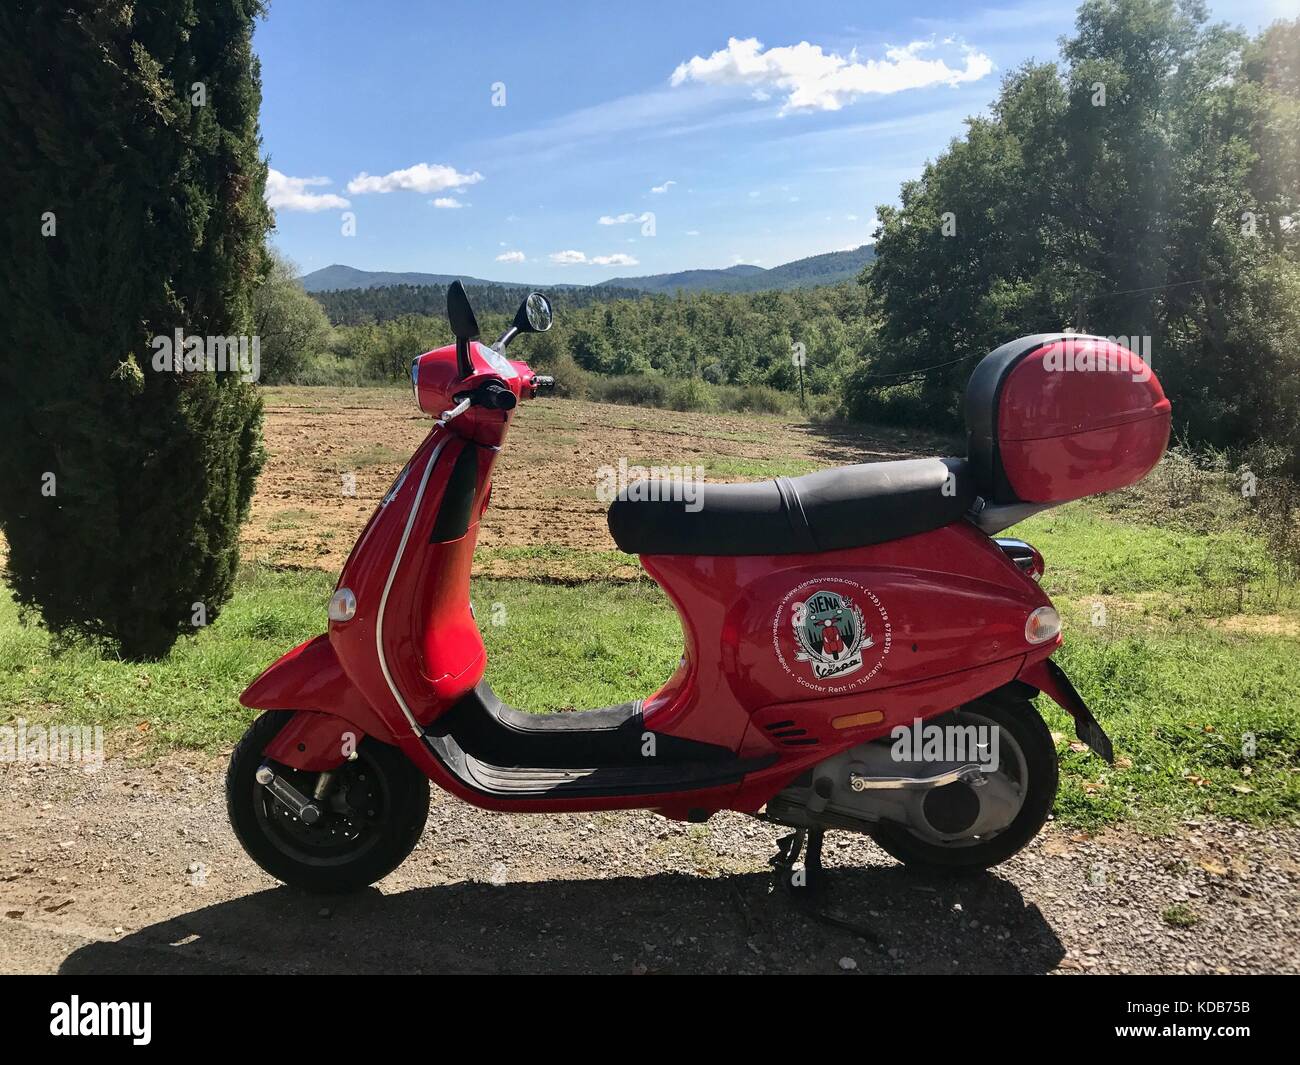 San Galgano, Italy - September 25, 2017: A red color vintage scooter for rent by Siena Vespa is parked in beautiful Tuscan landscape Stock Photo